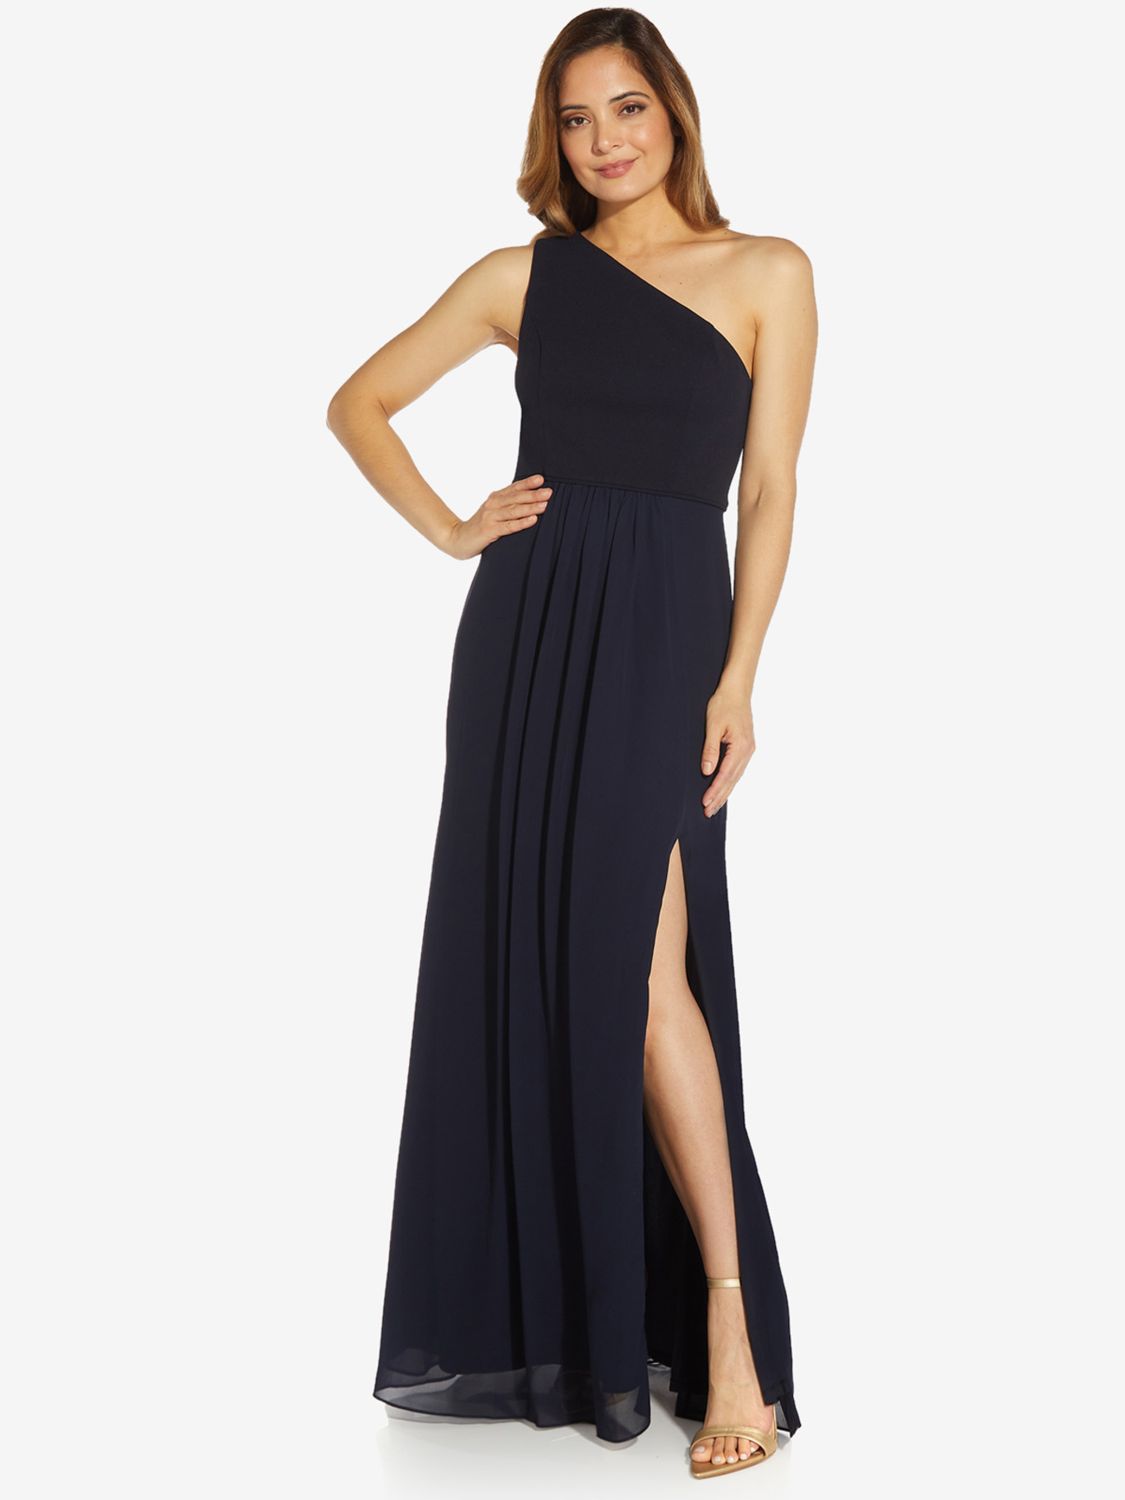 Adrianna Papell One Shoulder Gown, Midnight at John Lewis & Partners